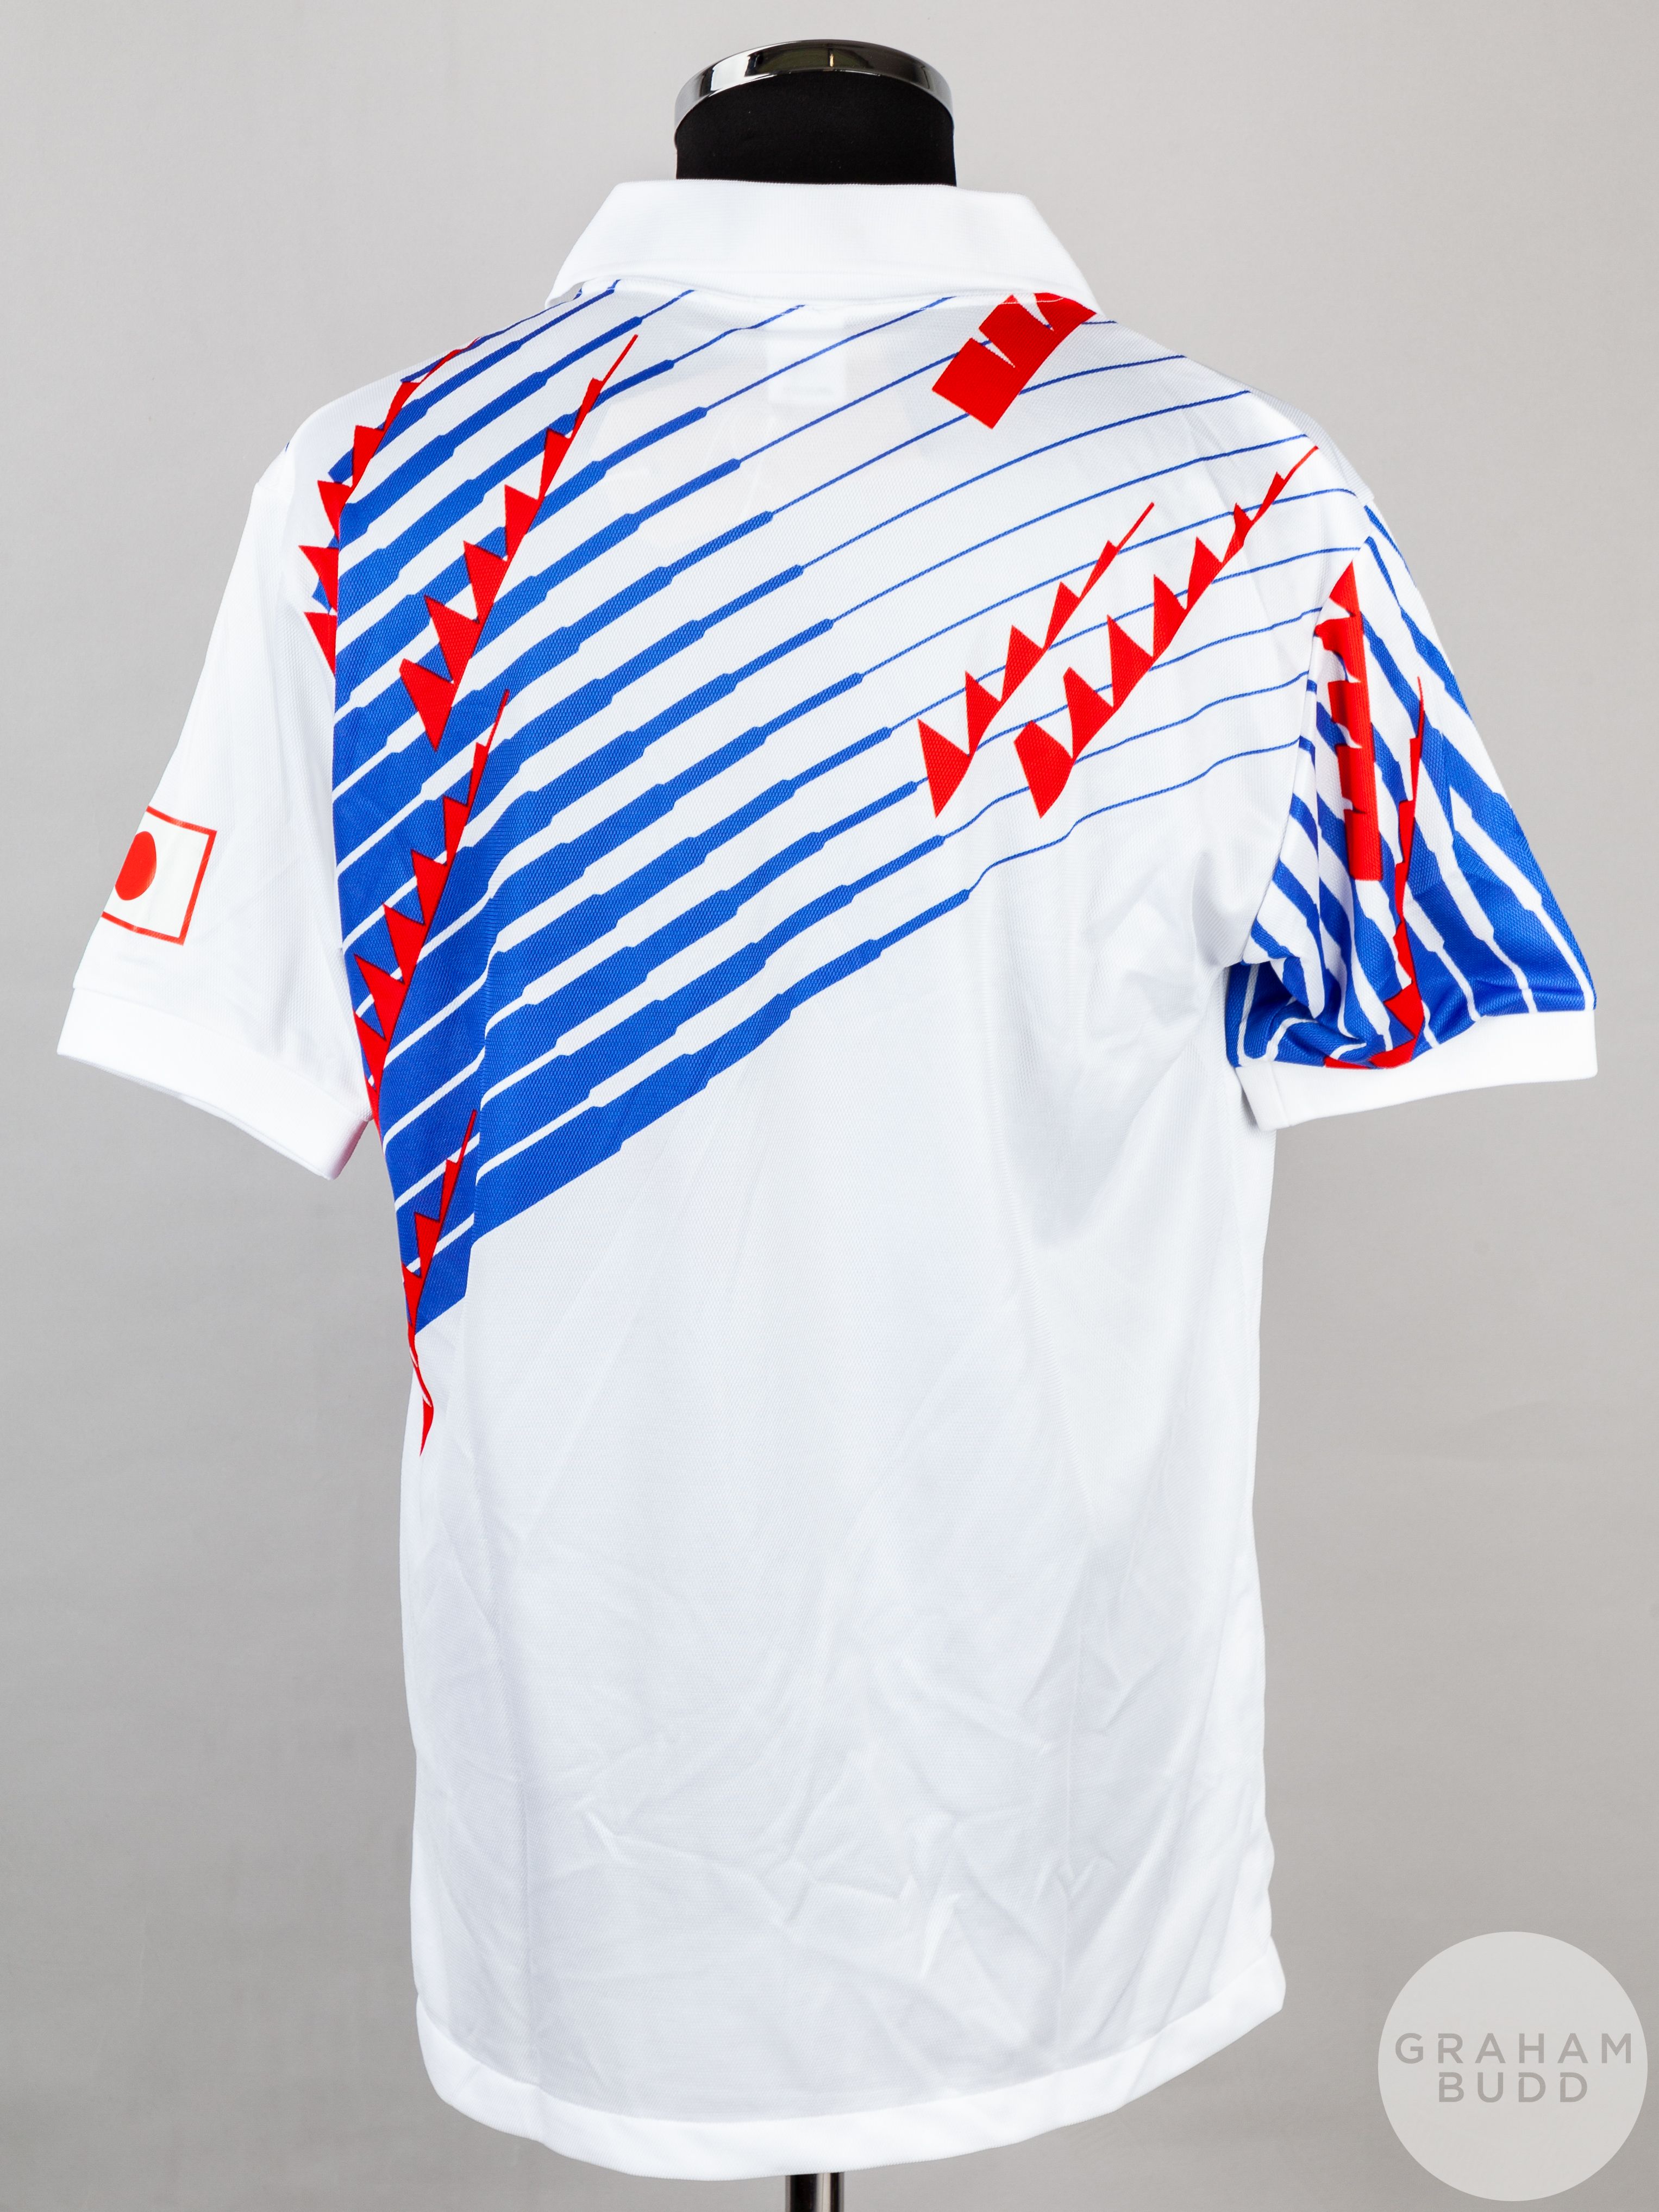 White, red and blue un-numbered Japan short-sleeved shirt, 1990s - Image 2 of 5